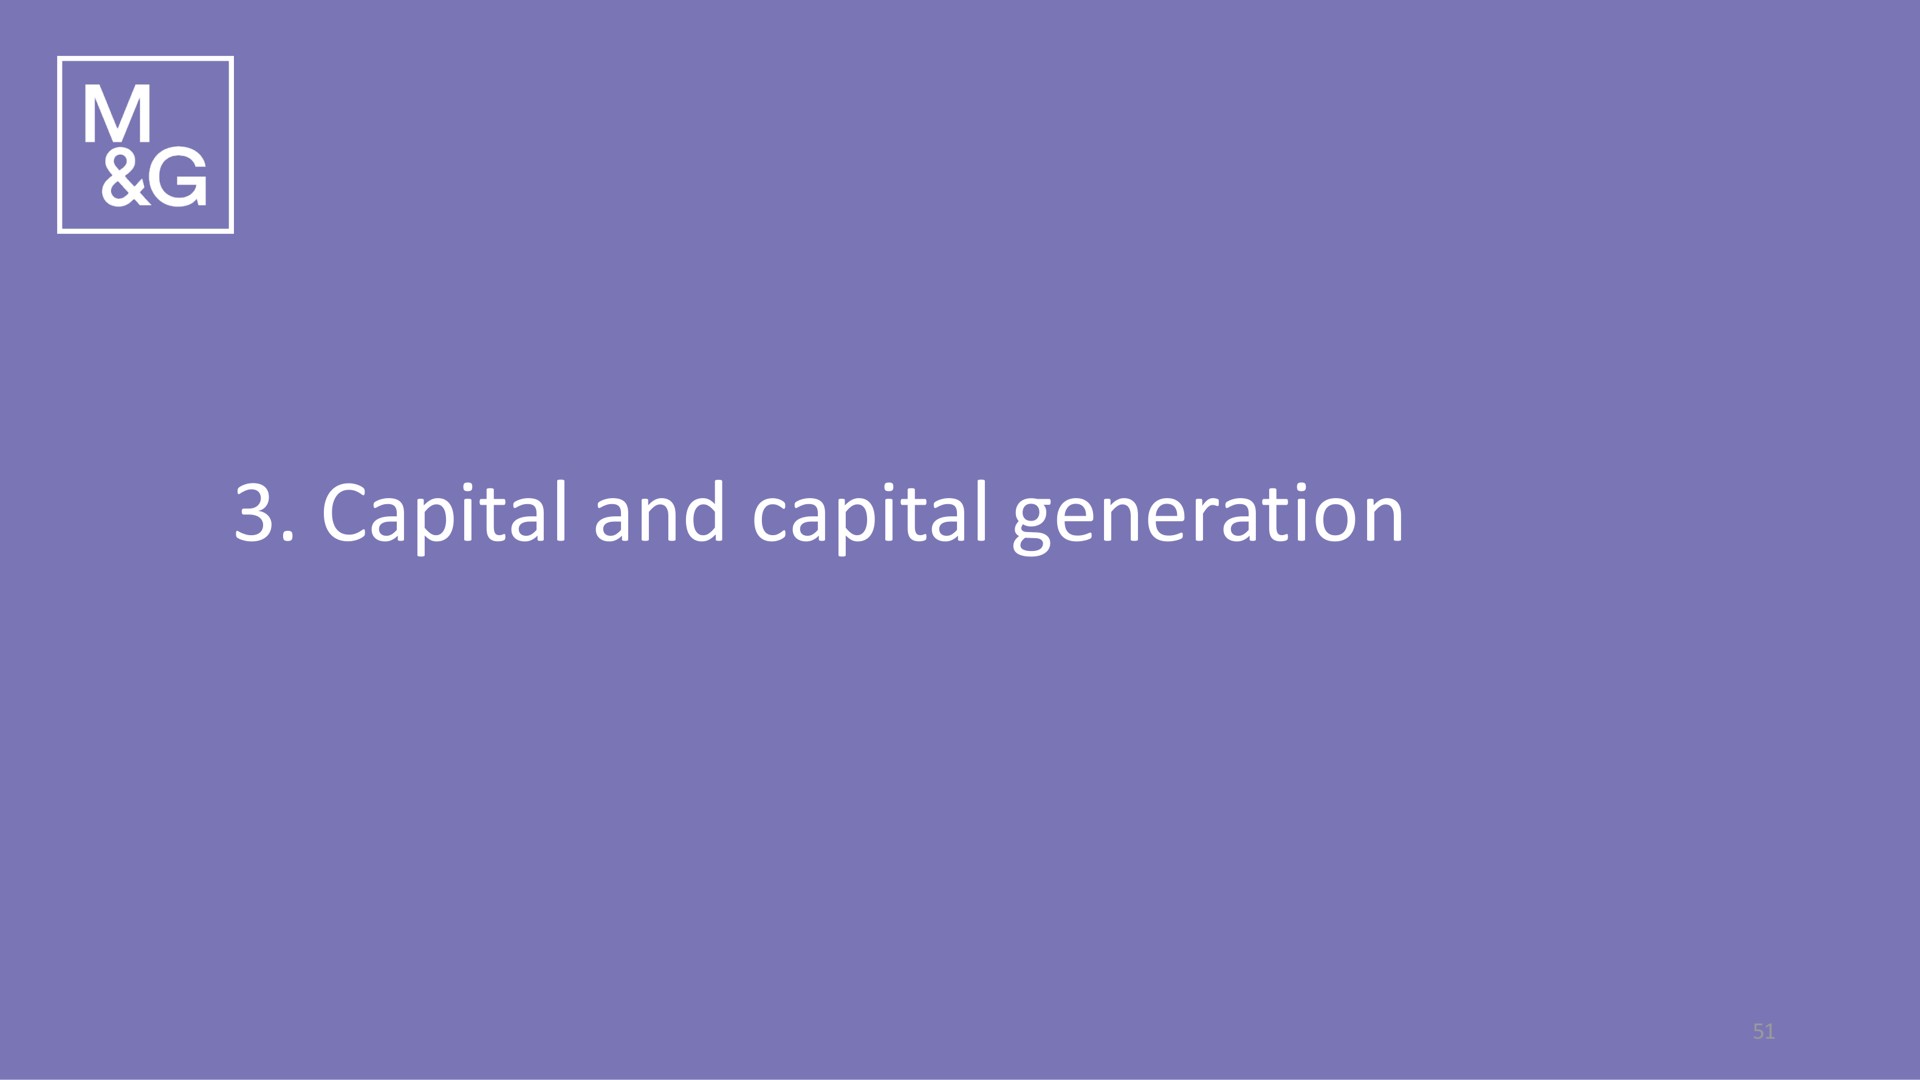 capital and capital generation | M&G